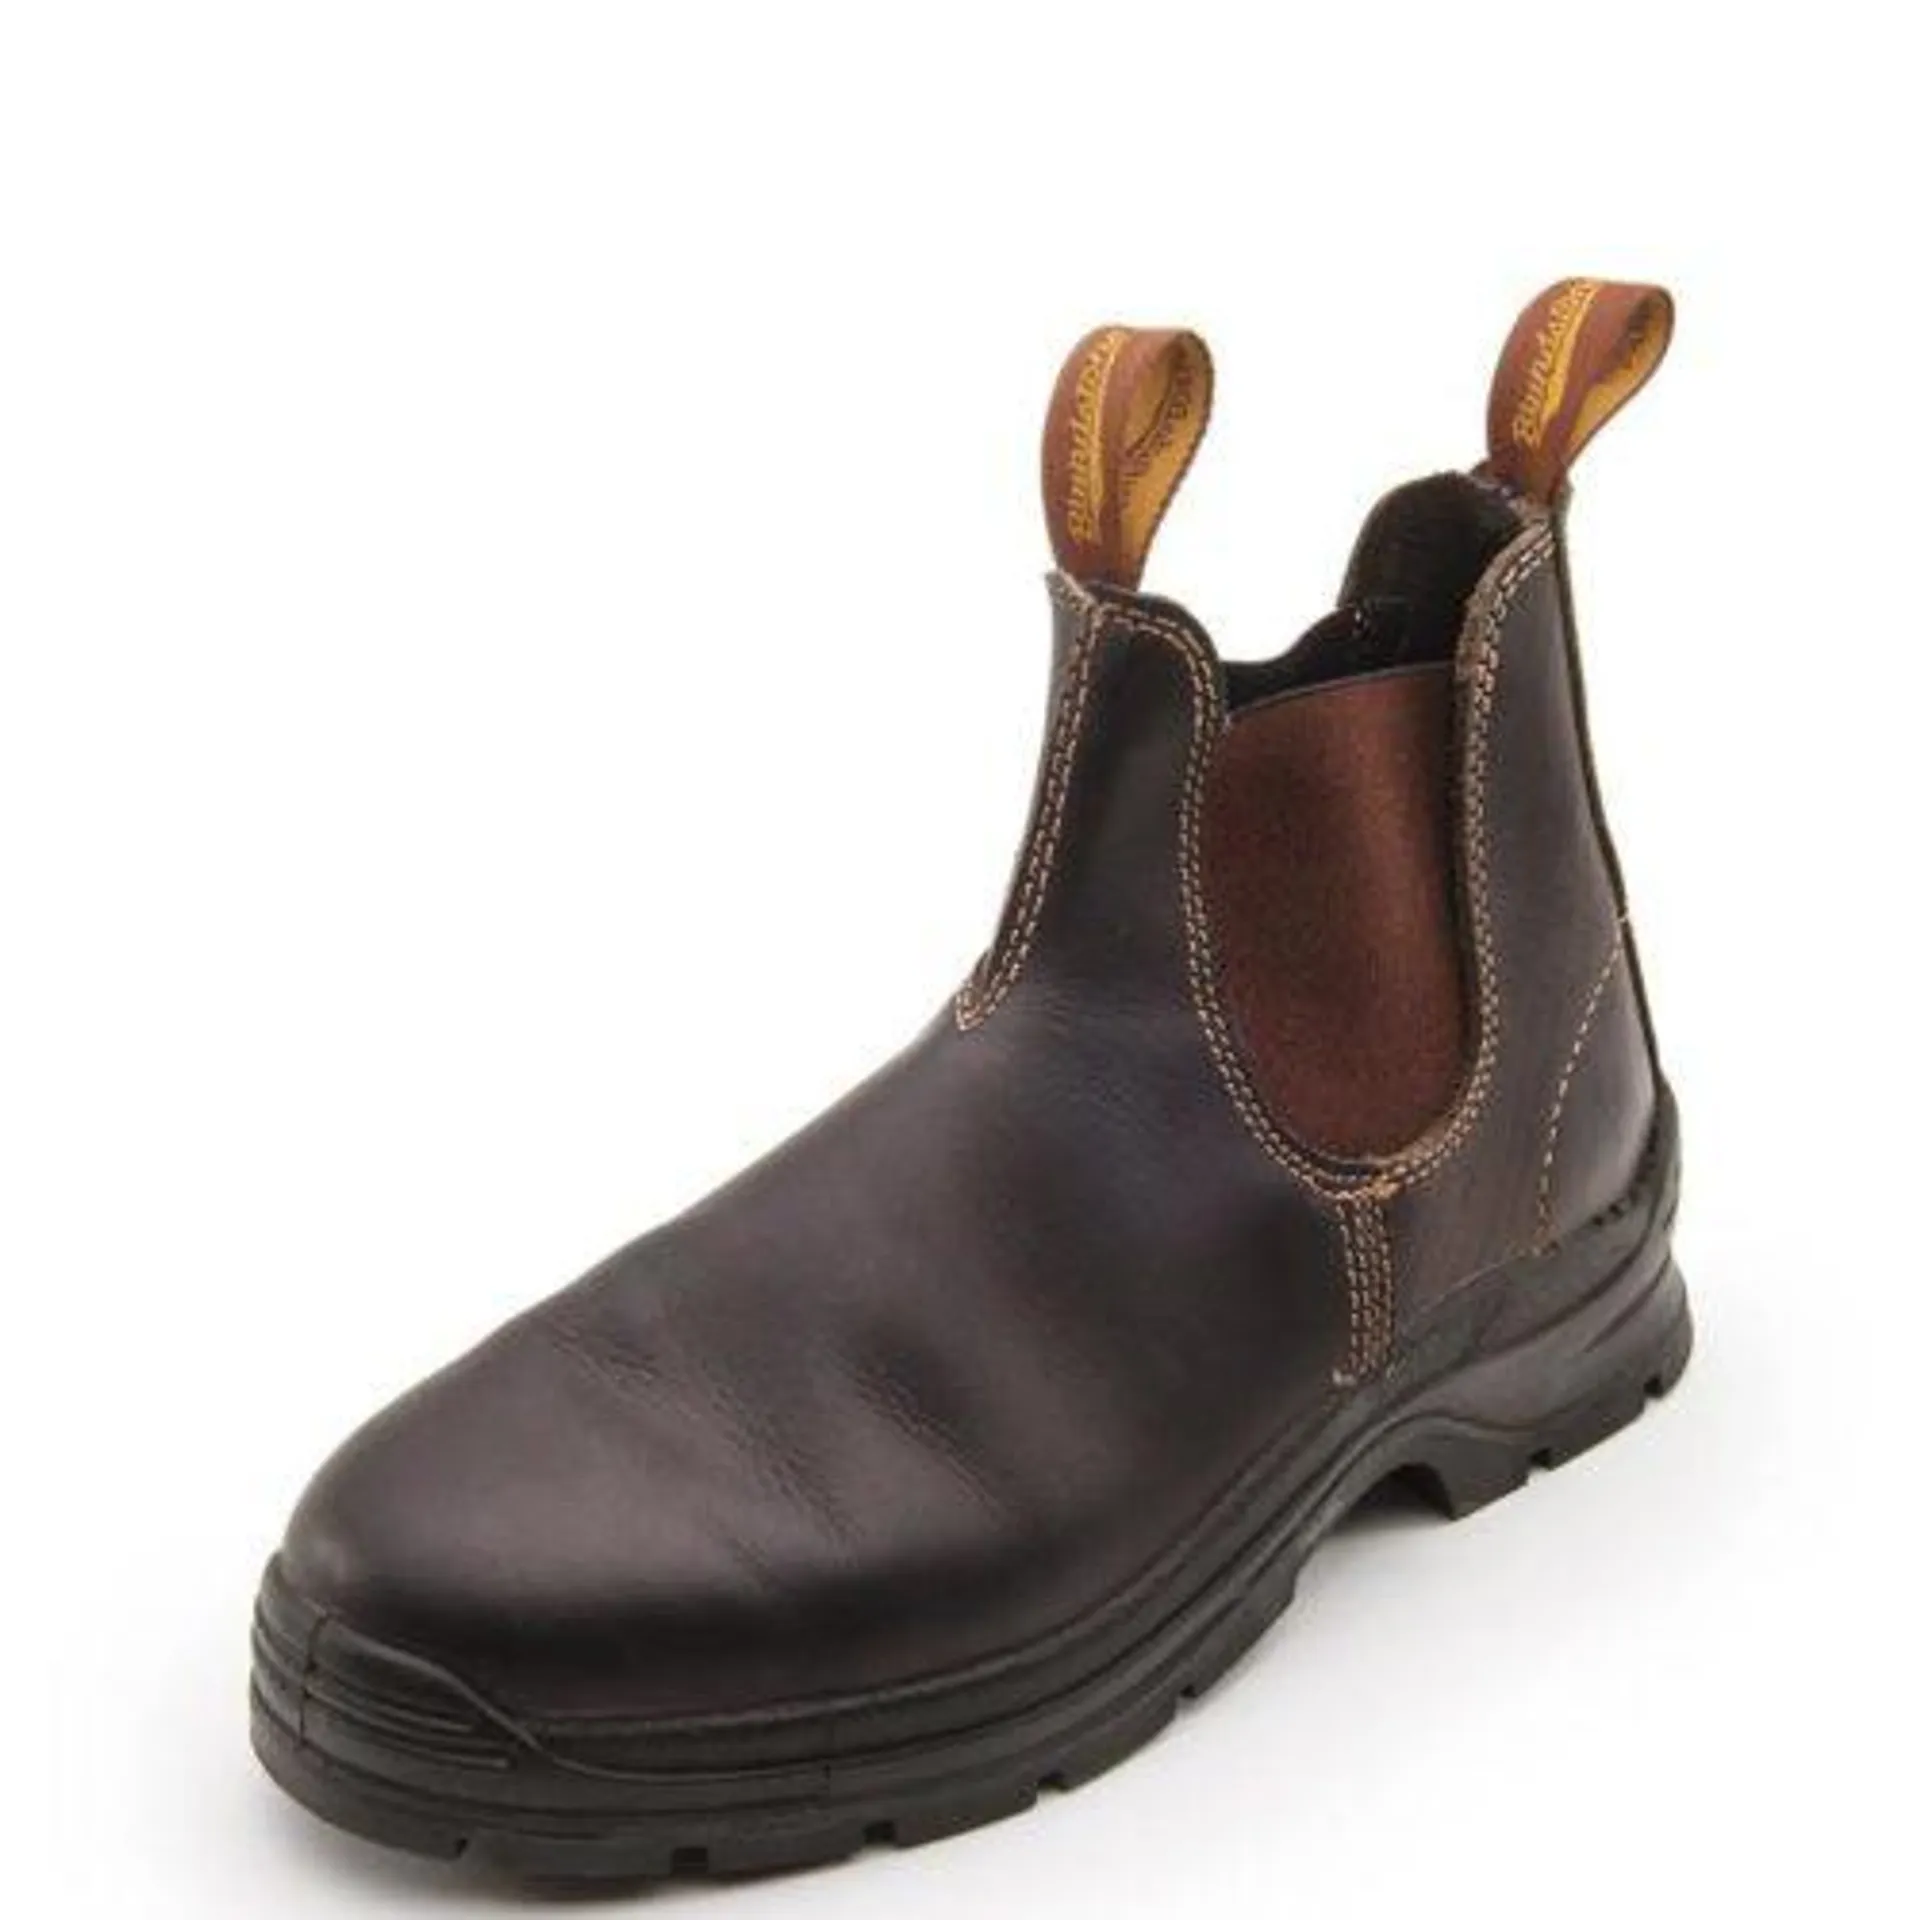 Blundstone Style 405 Worklife Non-Safety Elastic Sided Boot